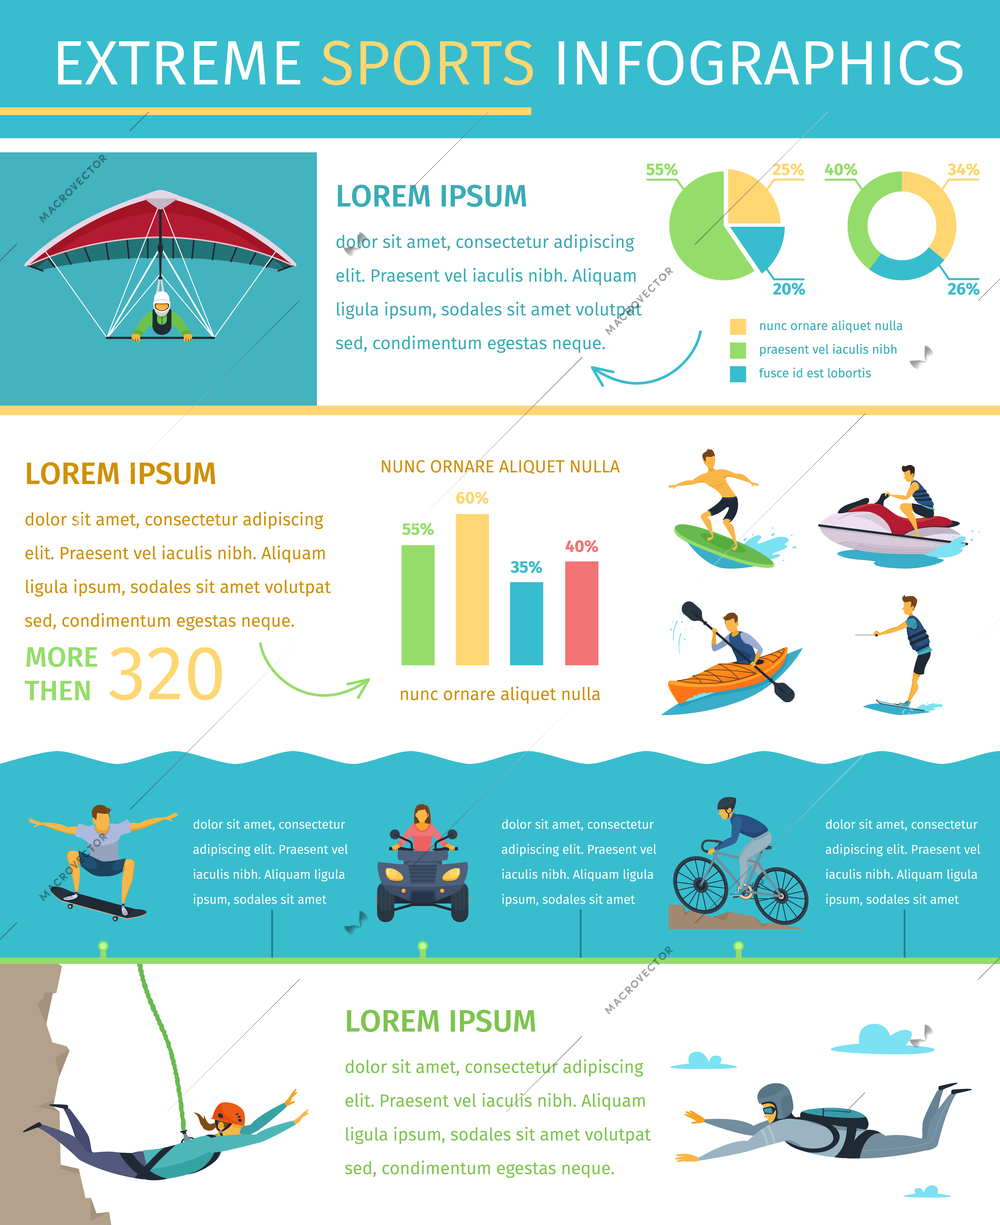 Popular extreme sports list information equipment products market sponsors events and developments flat infographic poster vector illustration